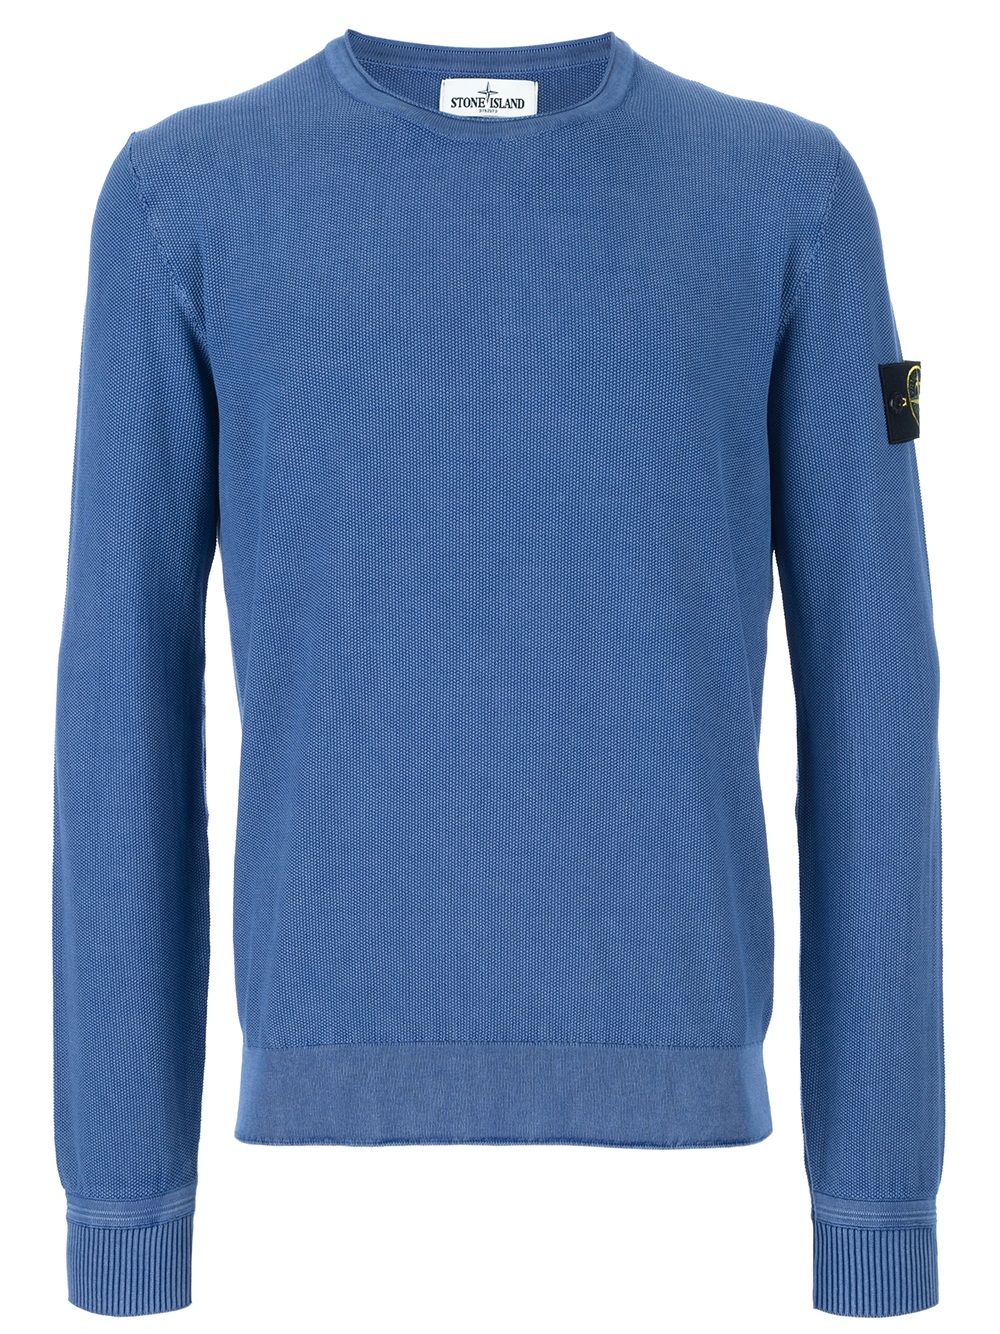 Lyst - Stone island Brand Patch Sweater in Blue for Men